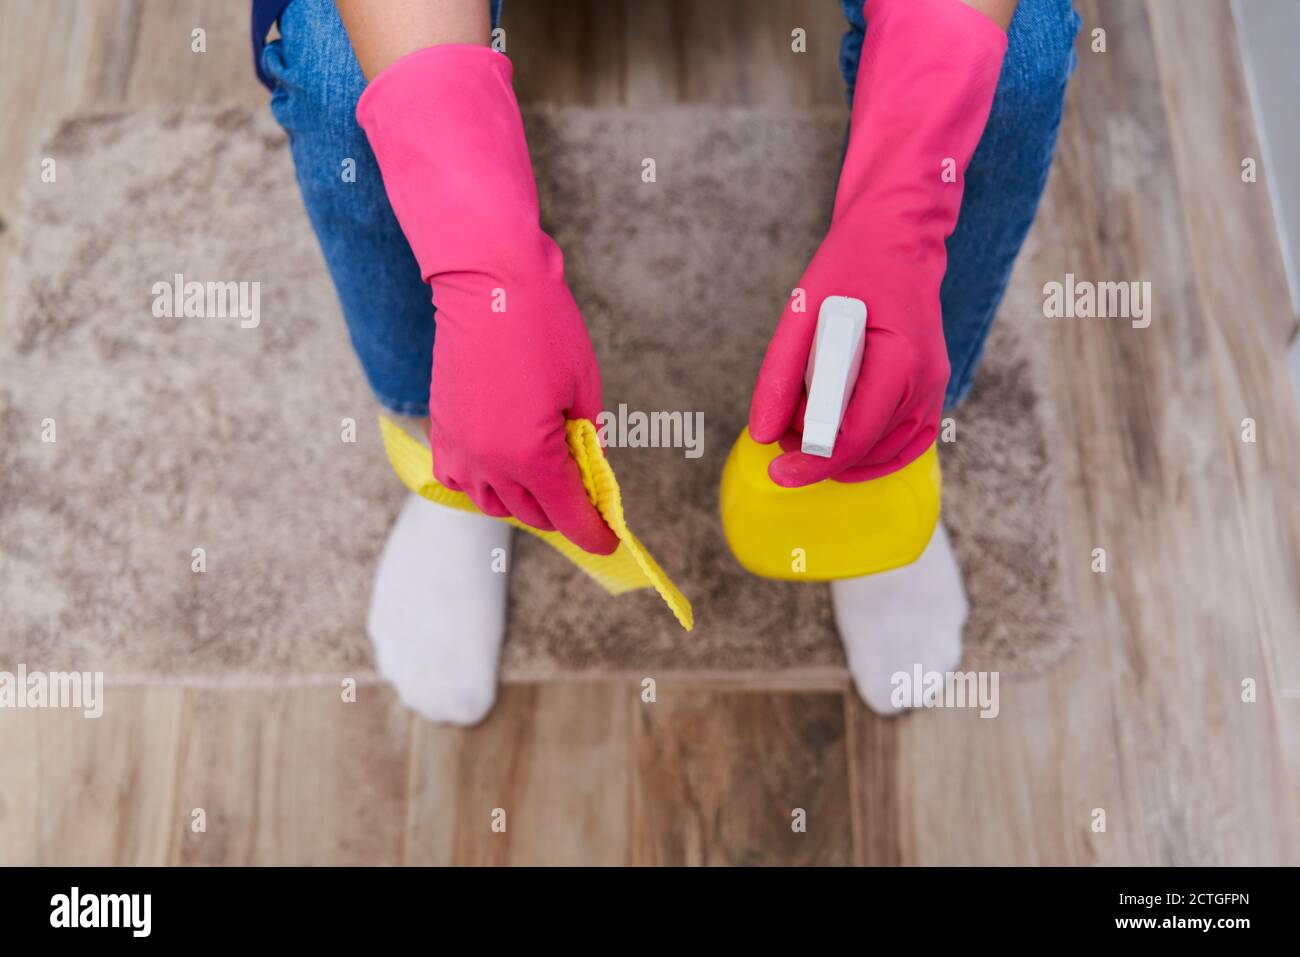 Tired woman in rubber gloves sitting on a toilet and holding cleaning spray. Top view Stock Photo